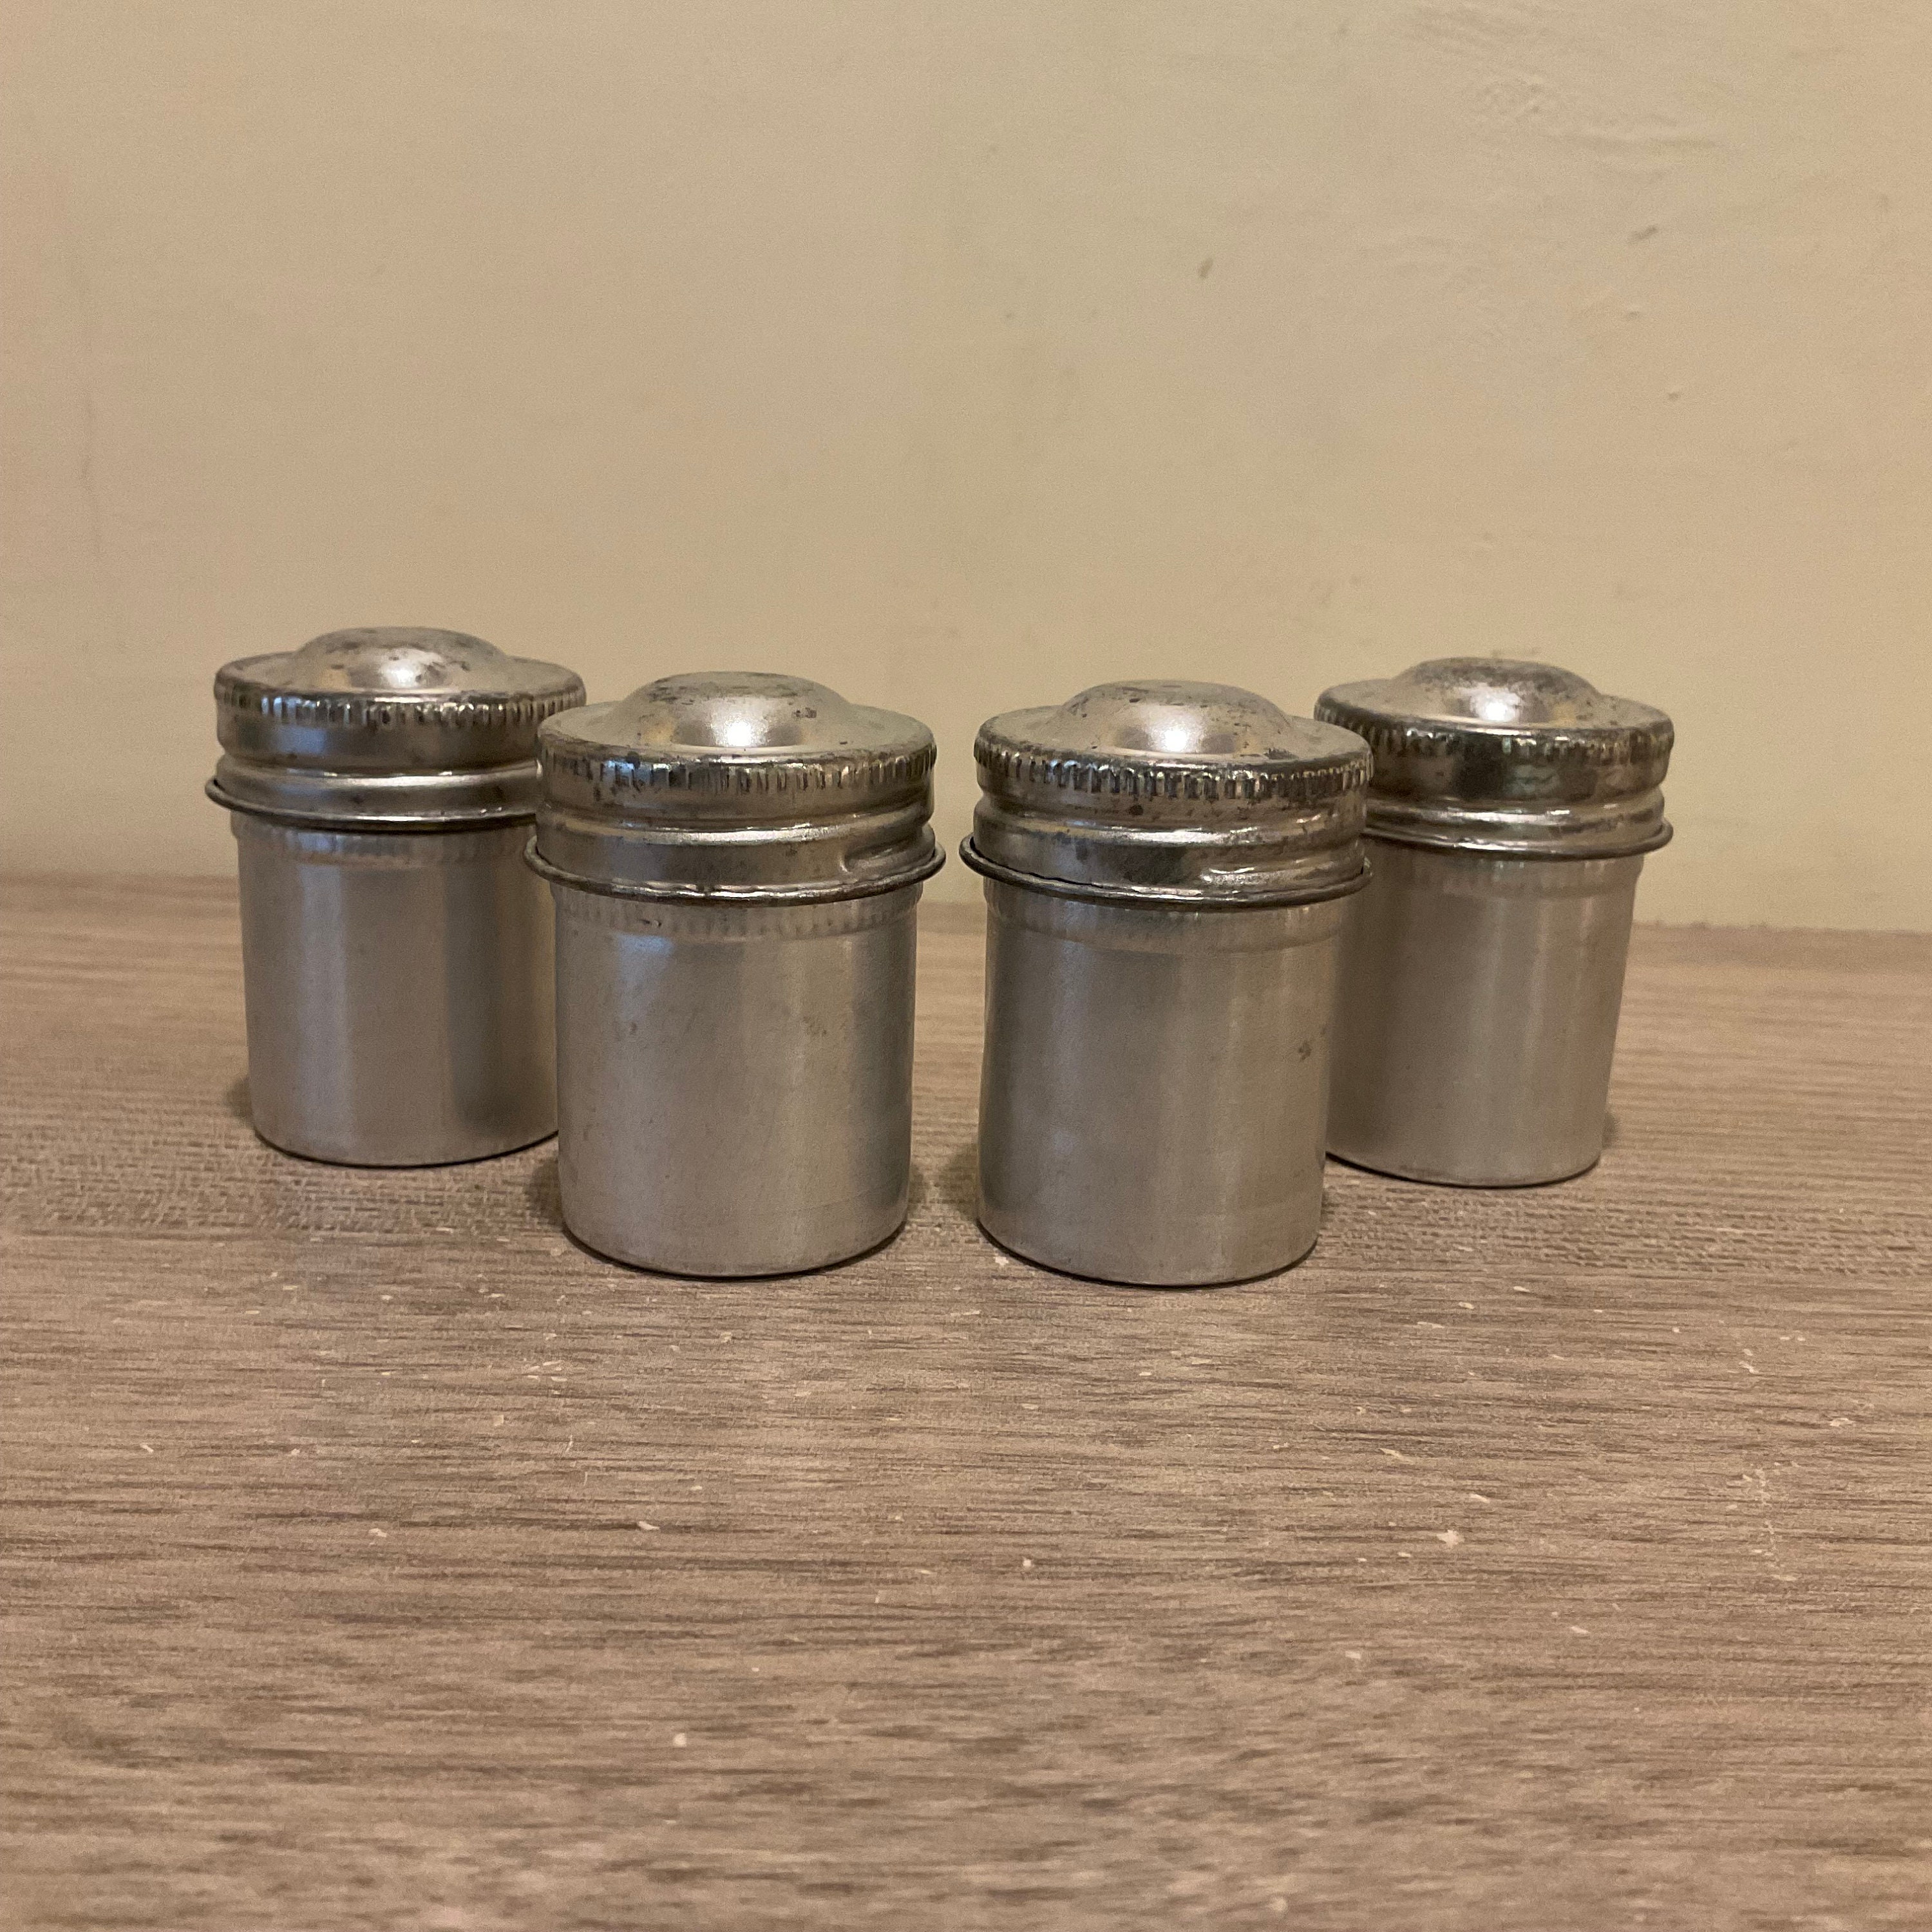 Buy Metal Film Canisters Online In India -  India